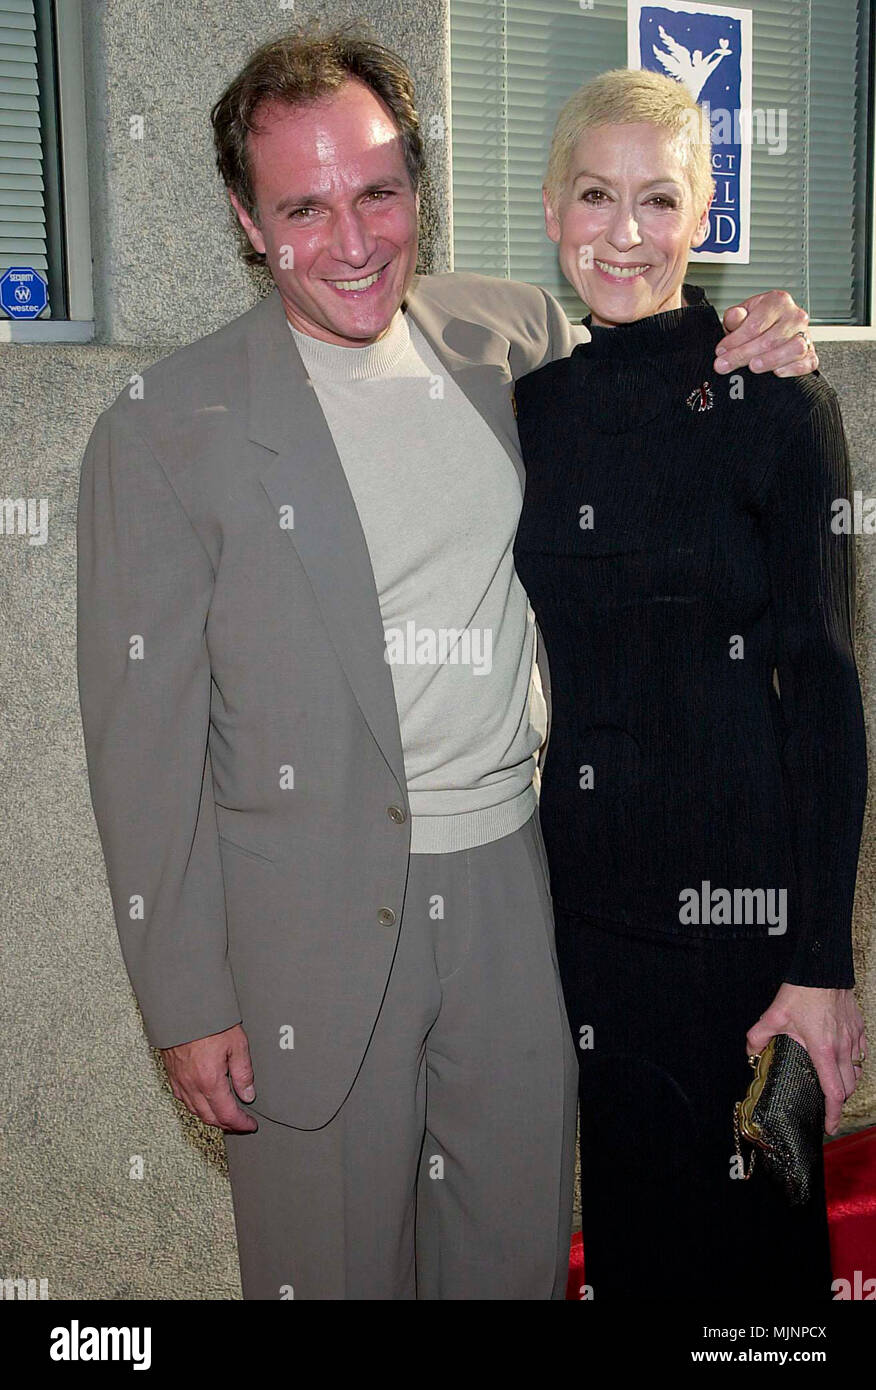 15 Jul 2000, Los Angeles, California, USA --- Robert Desiderio and Judith  Light at the 6th Annual Angel Awards from Project Angel Food. 7/15/00-Los  Angeles, CA ---  Tsuni / Bourquard Robert